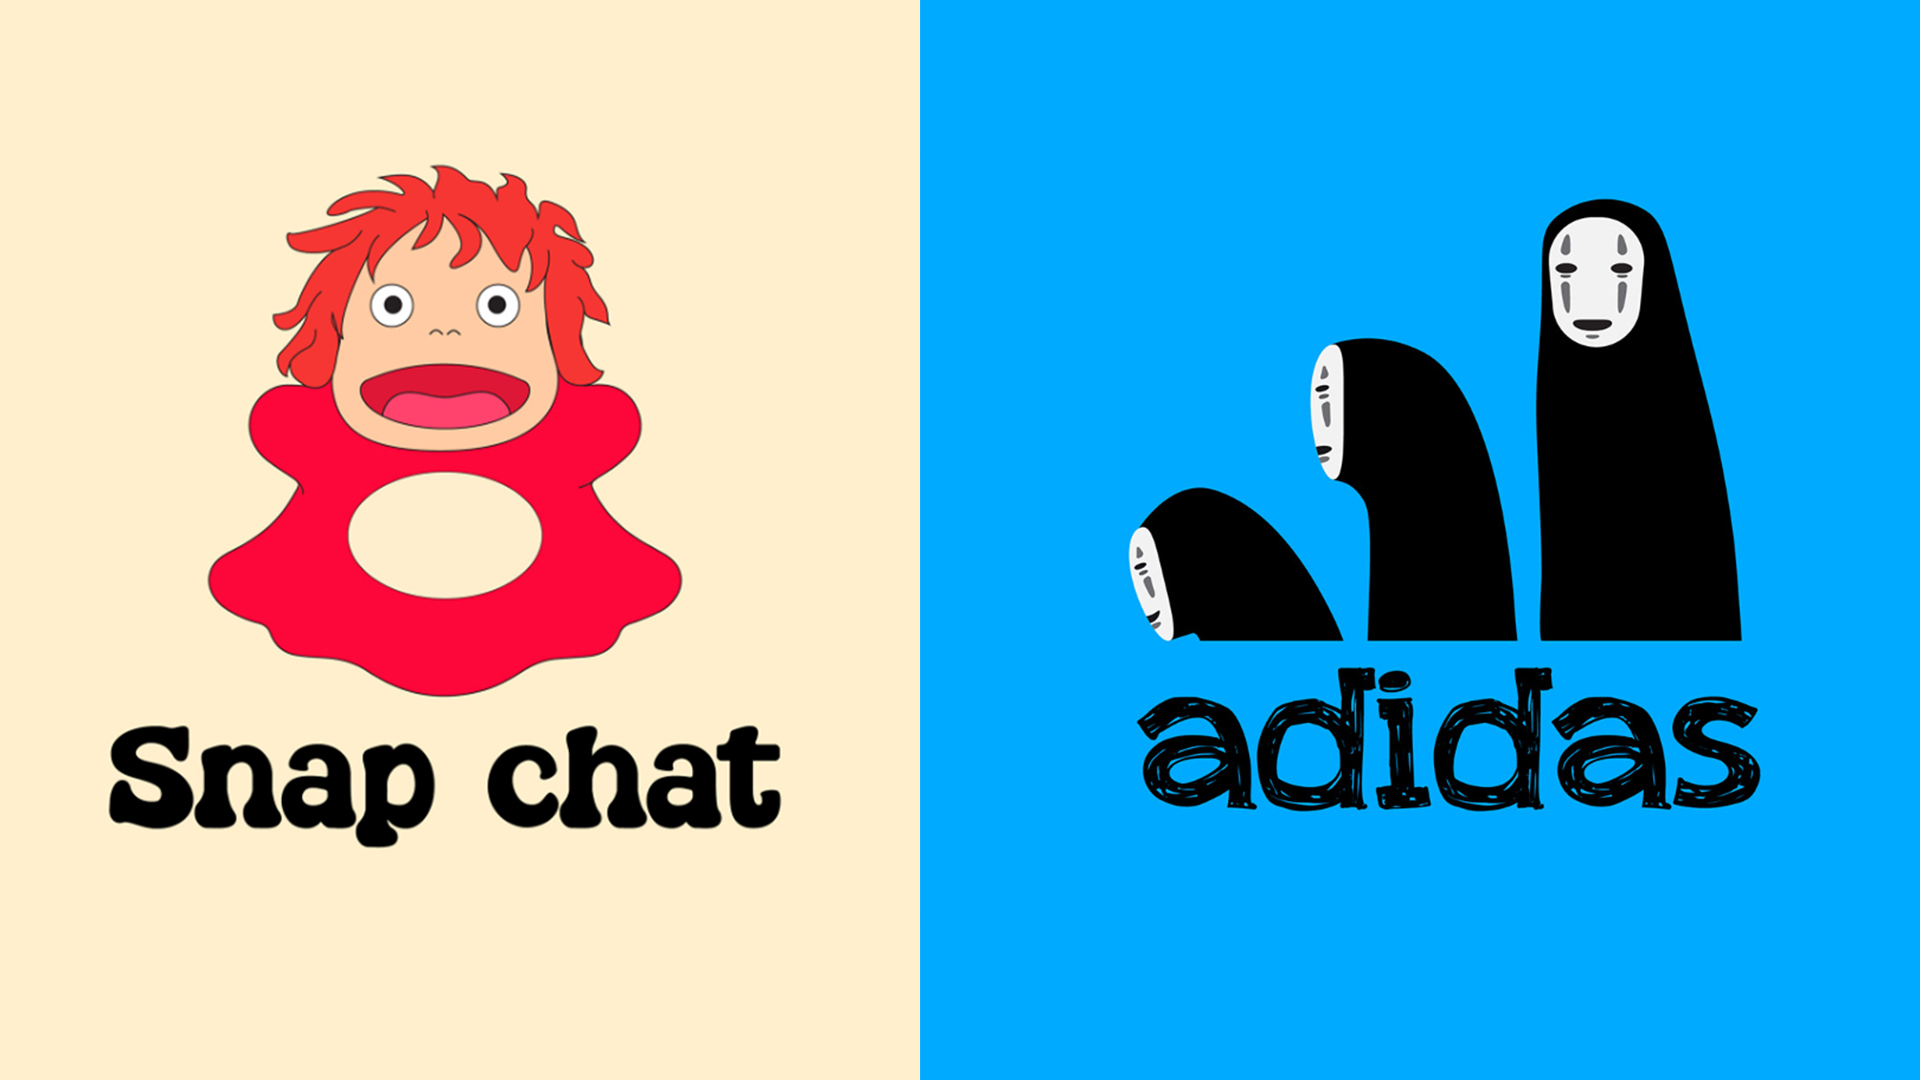 Famous logos reimagined Studio Ghibli are absolute delight | Creative